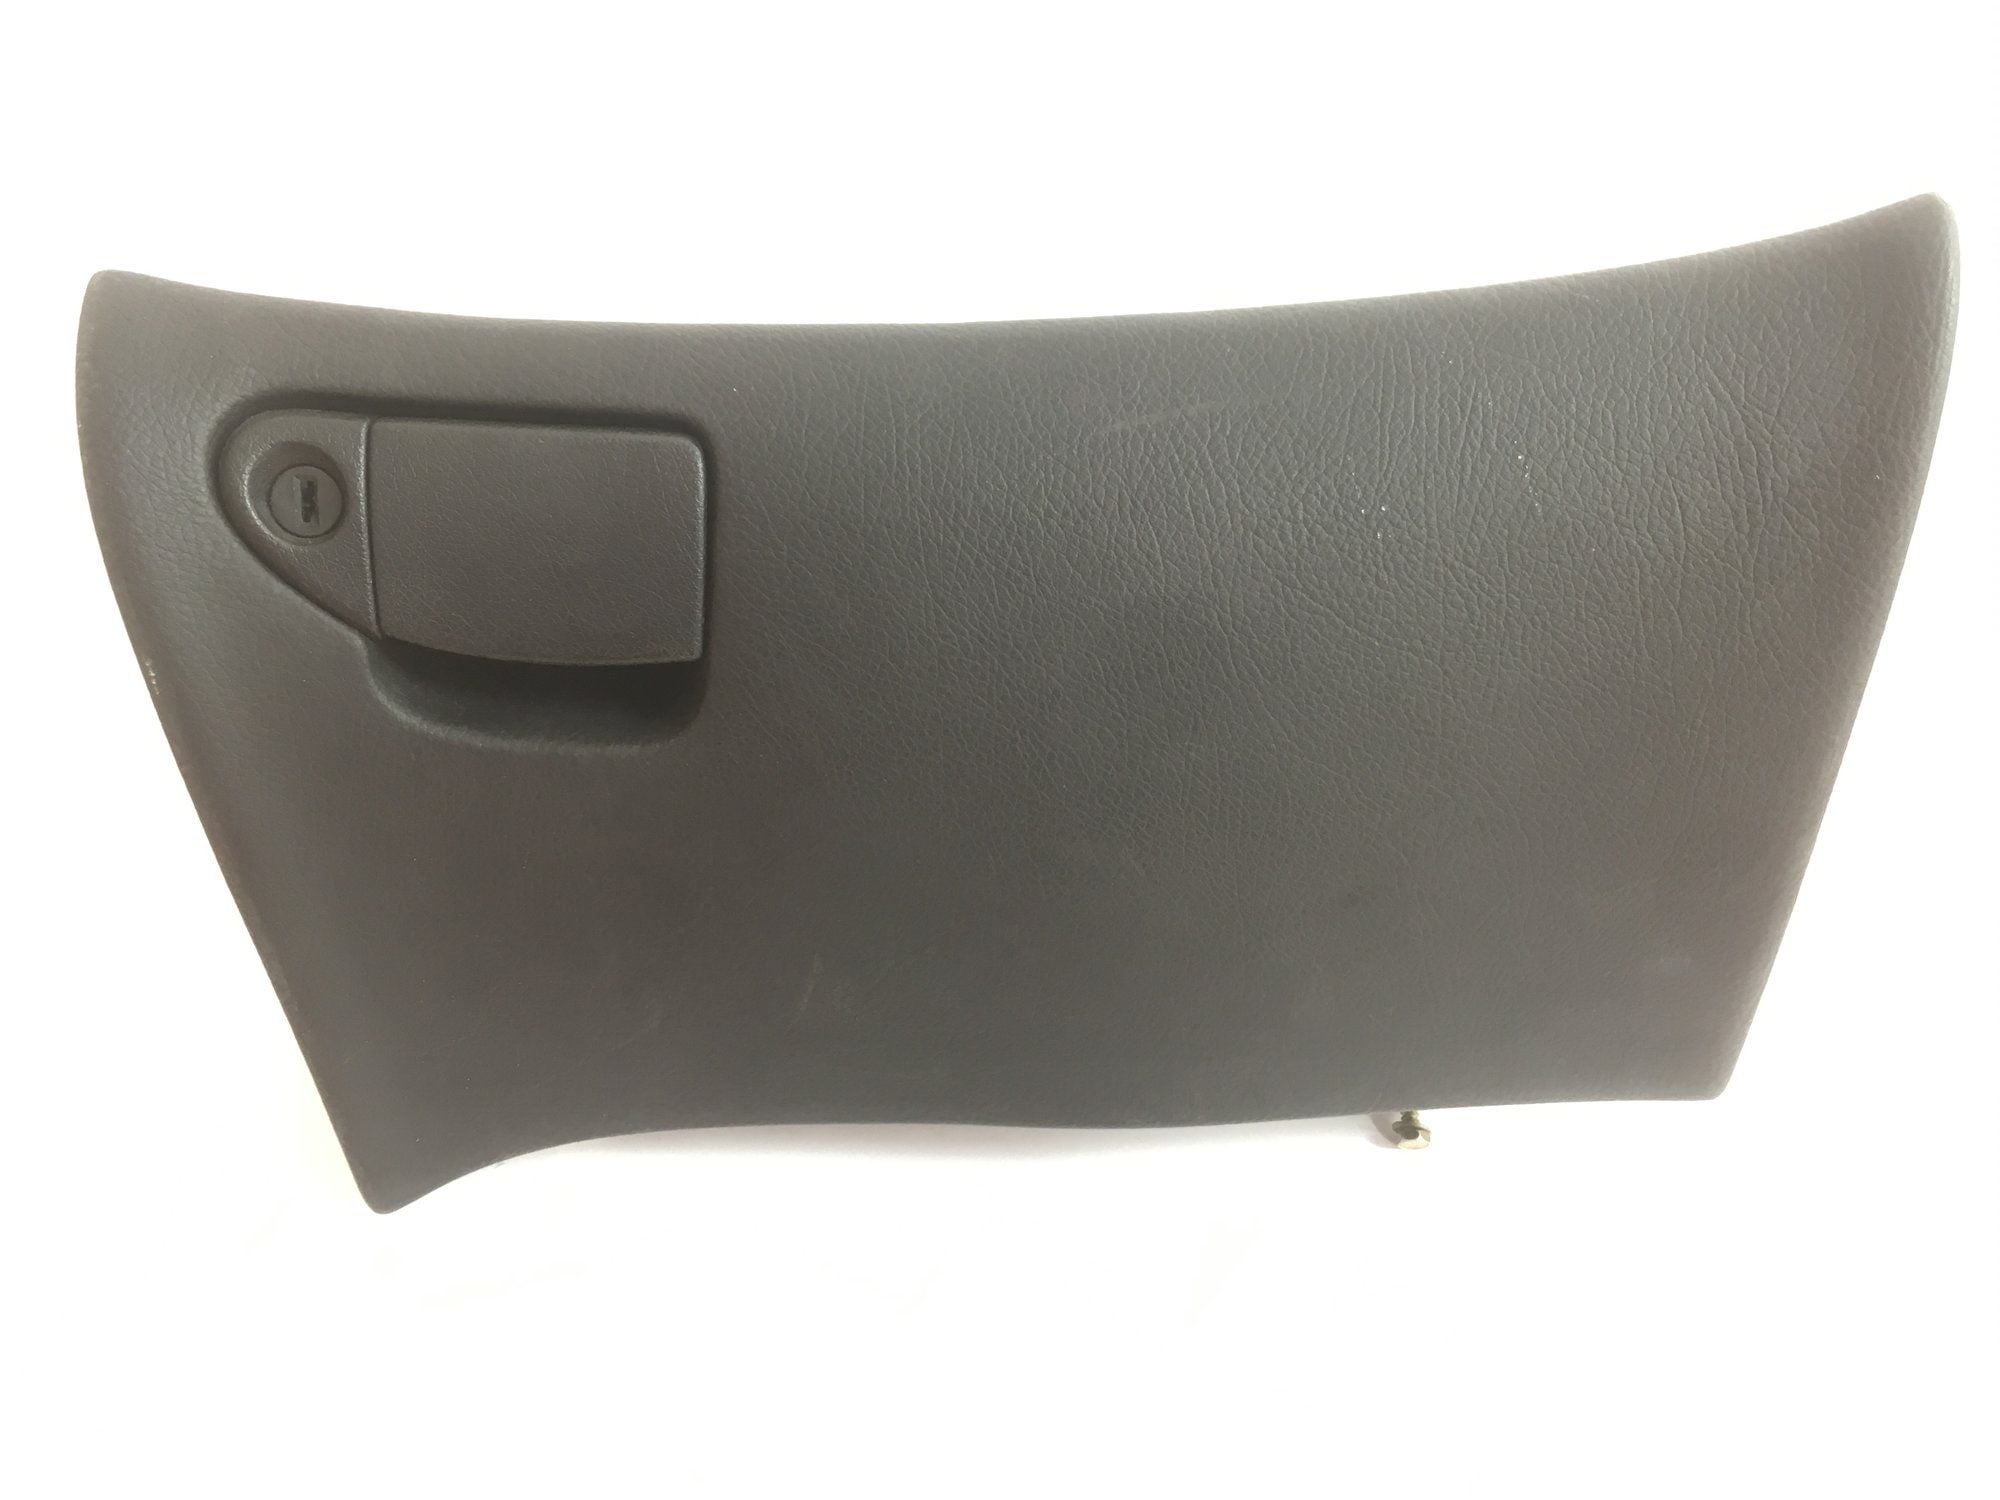 Interior/Upholstery - 1993 Glove Box (Black) - New or Used - 1993 Mazda RX-7 - East Troy, WI 53120, United States